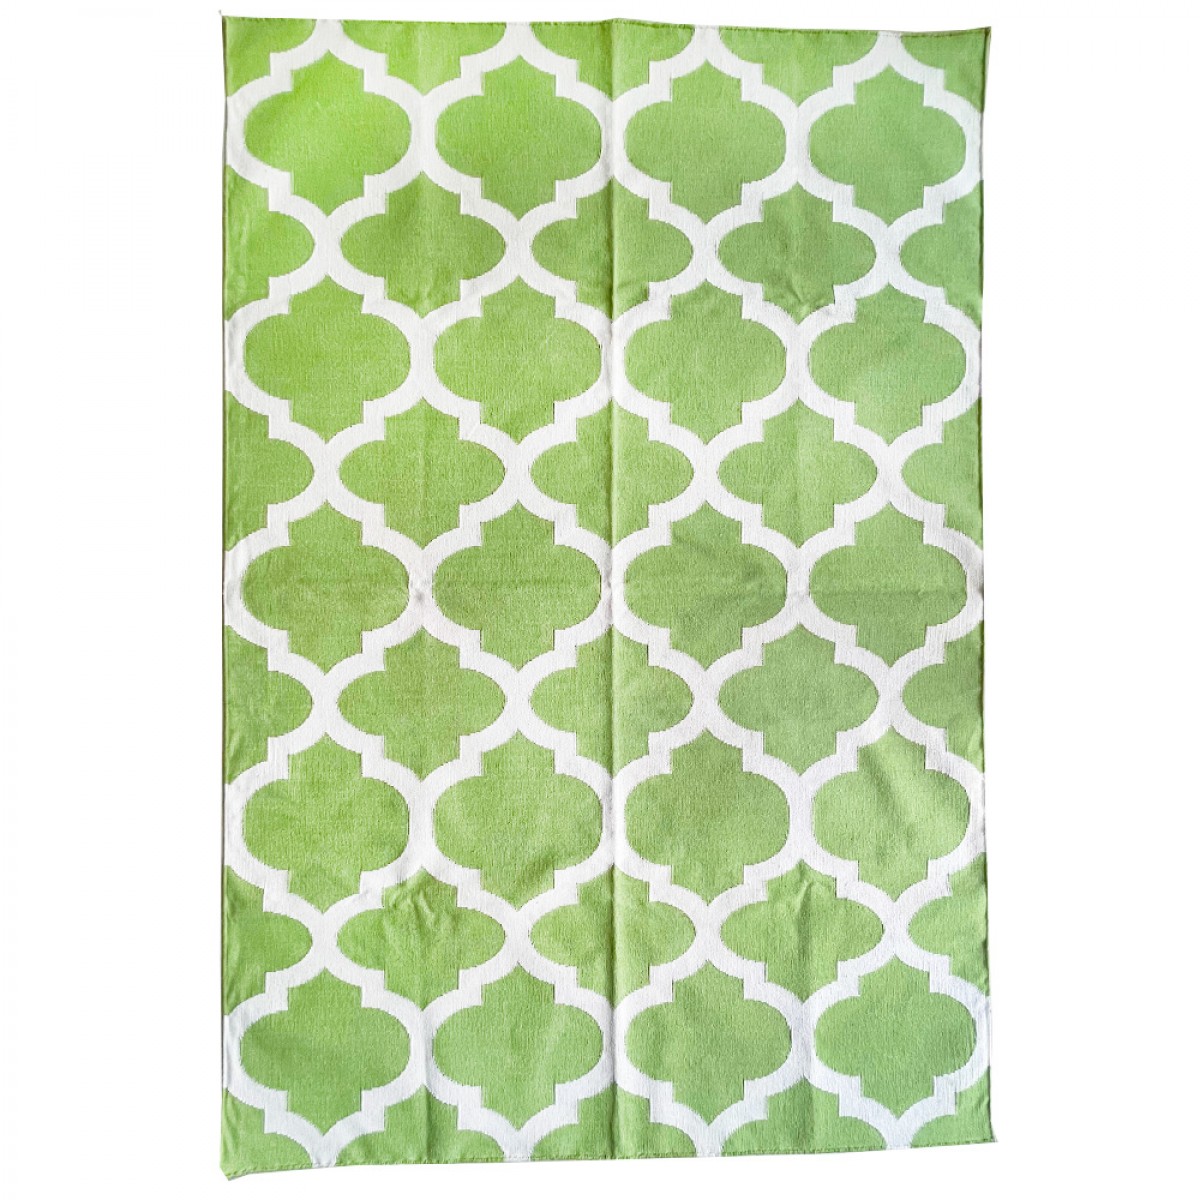 Cotton Floor Rugs - Green (Made to Order)